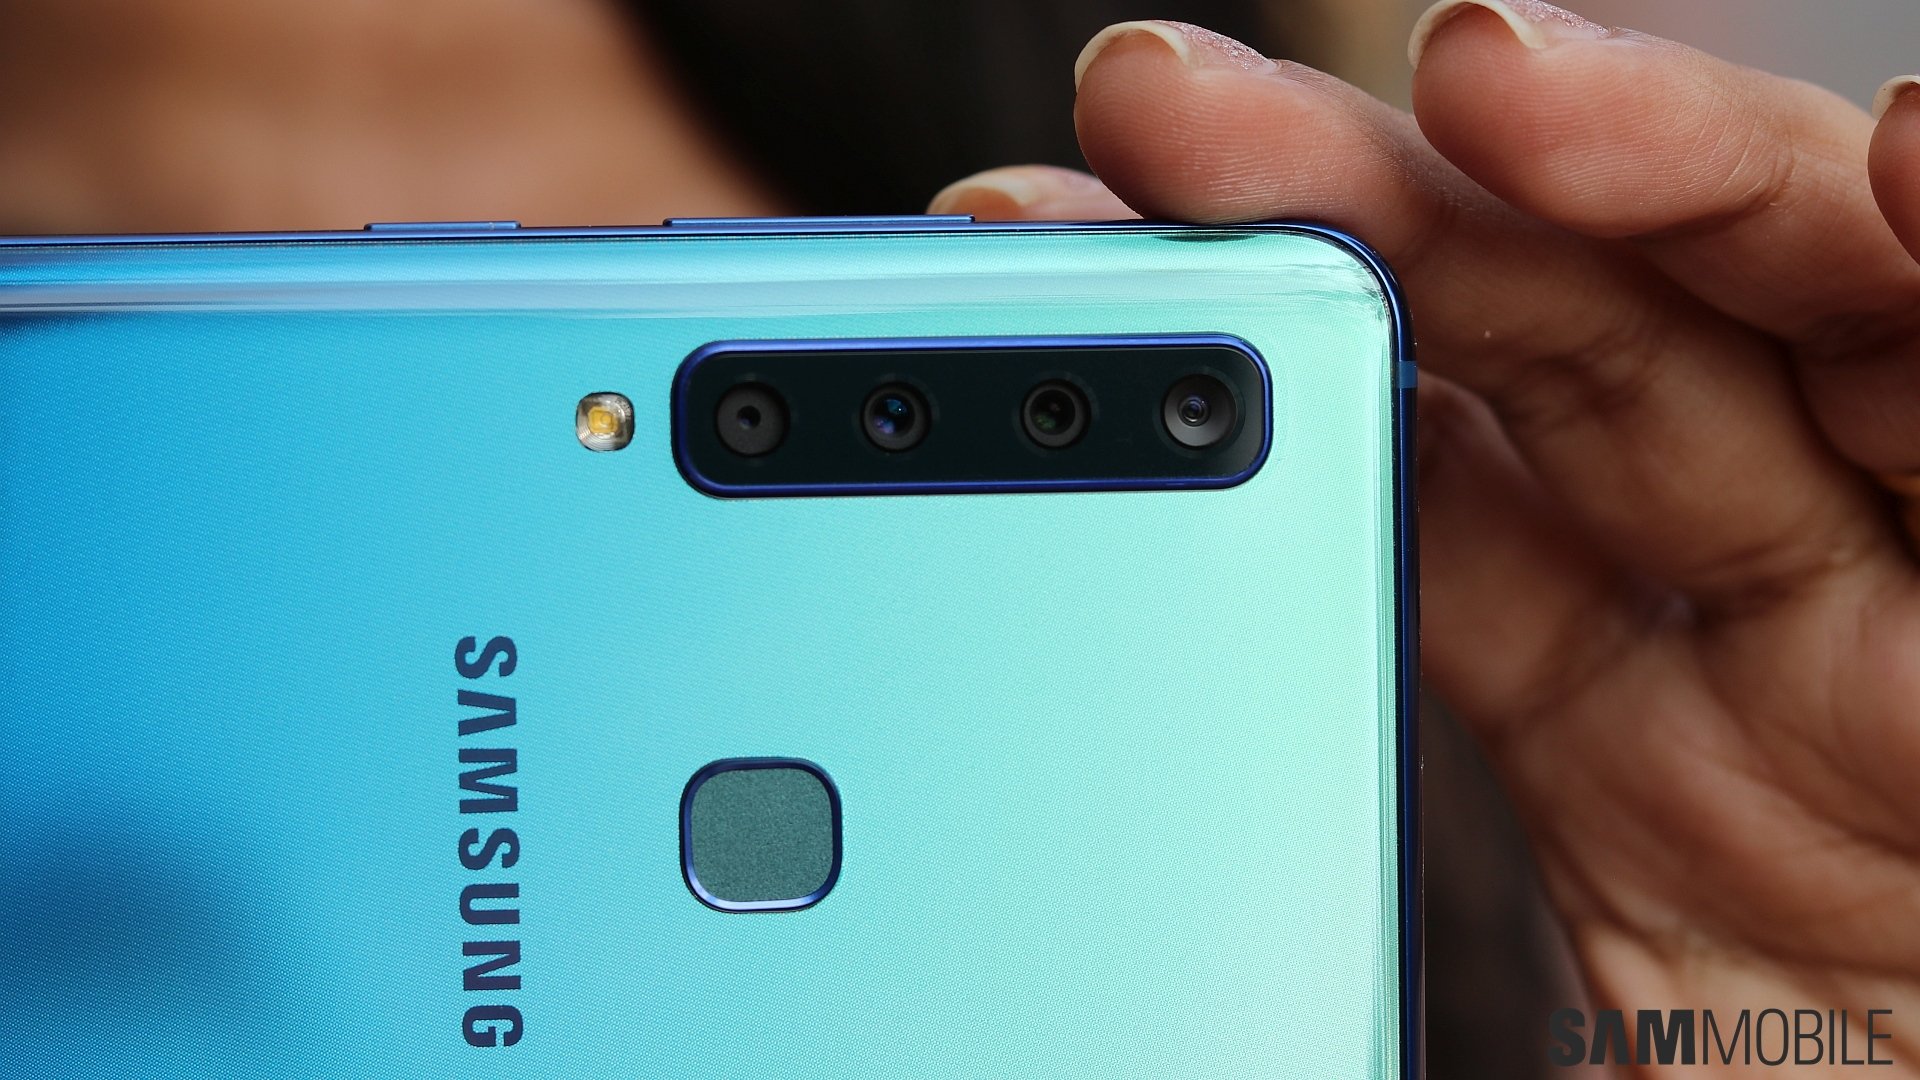 Galaxy A9 (2018) review: It's not four cameras that make it a good phone -  SamMobile